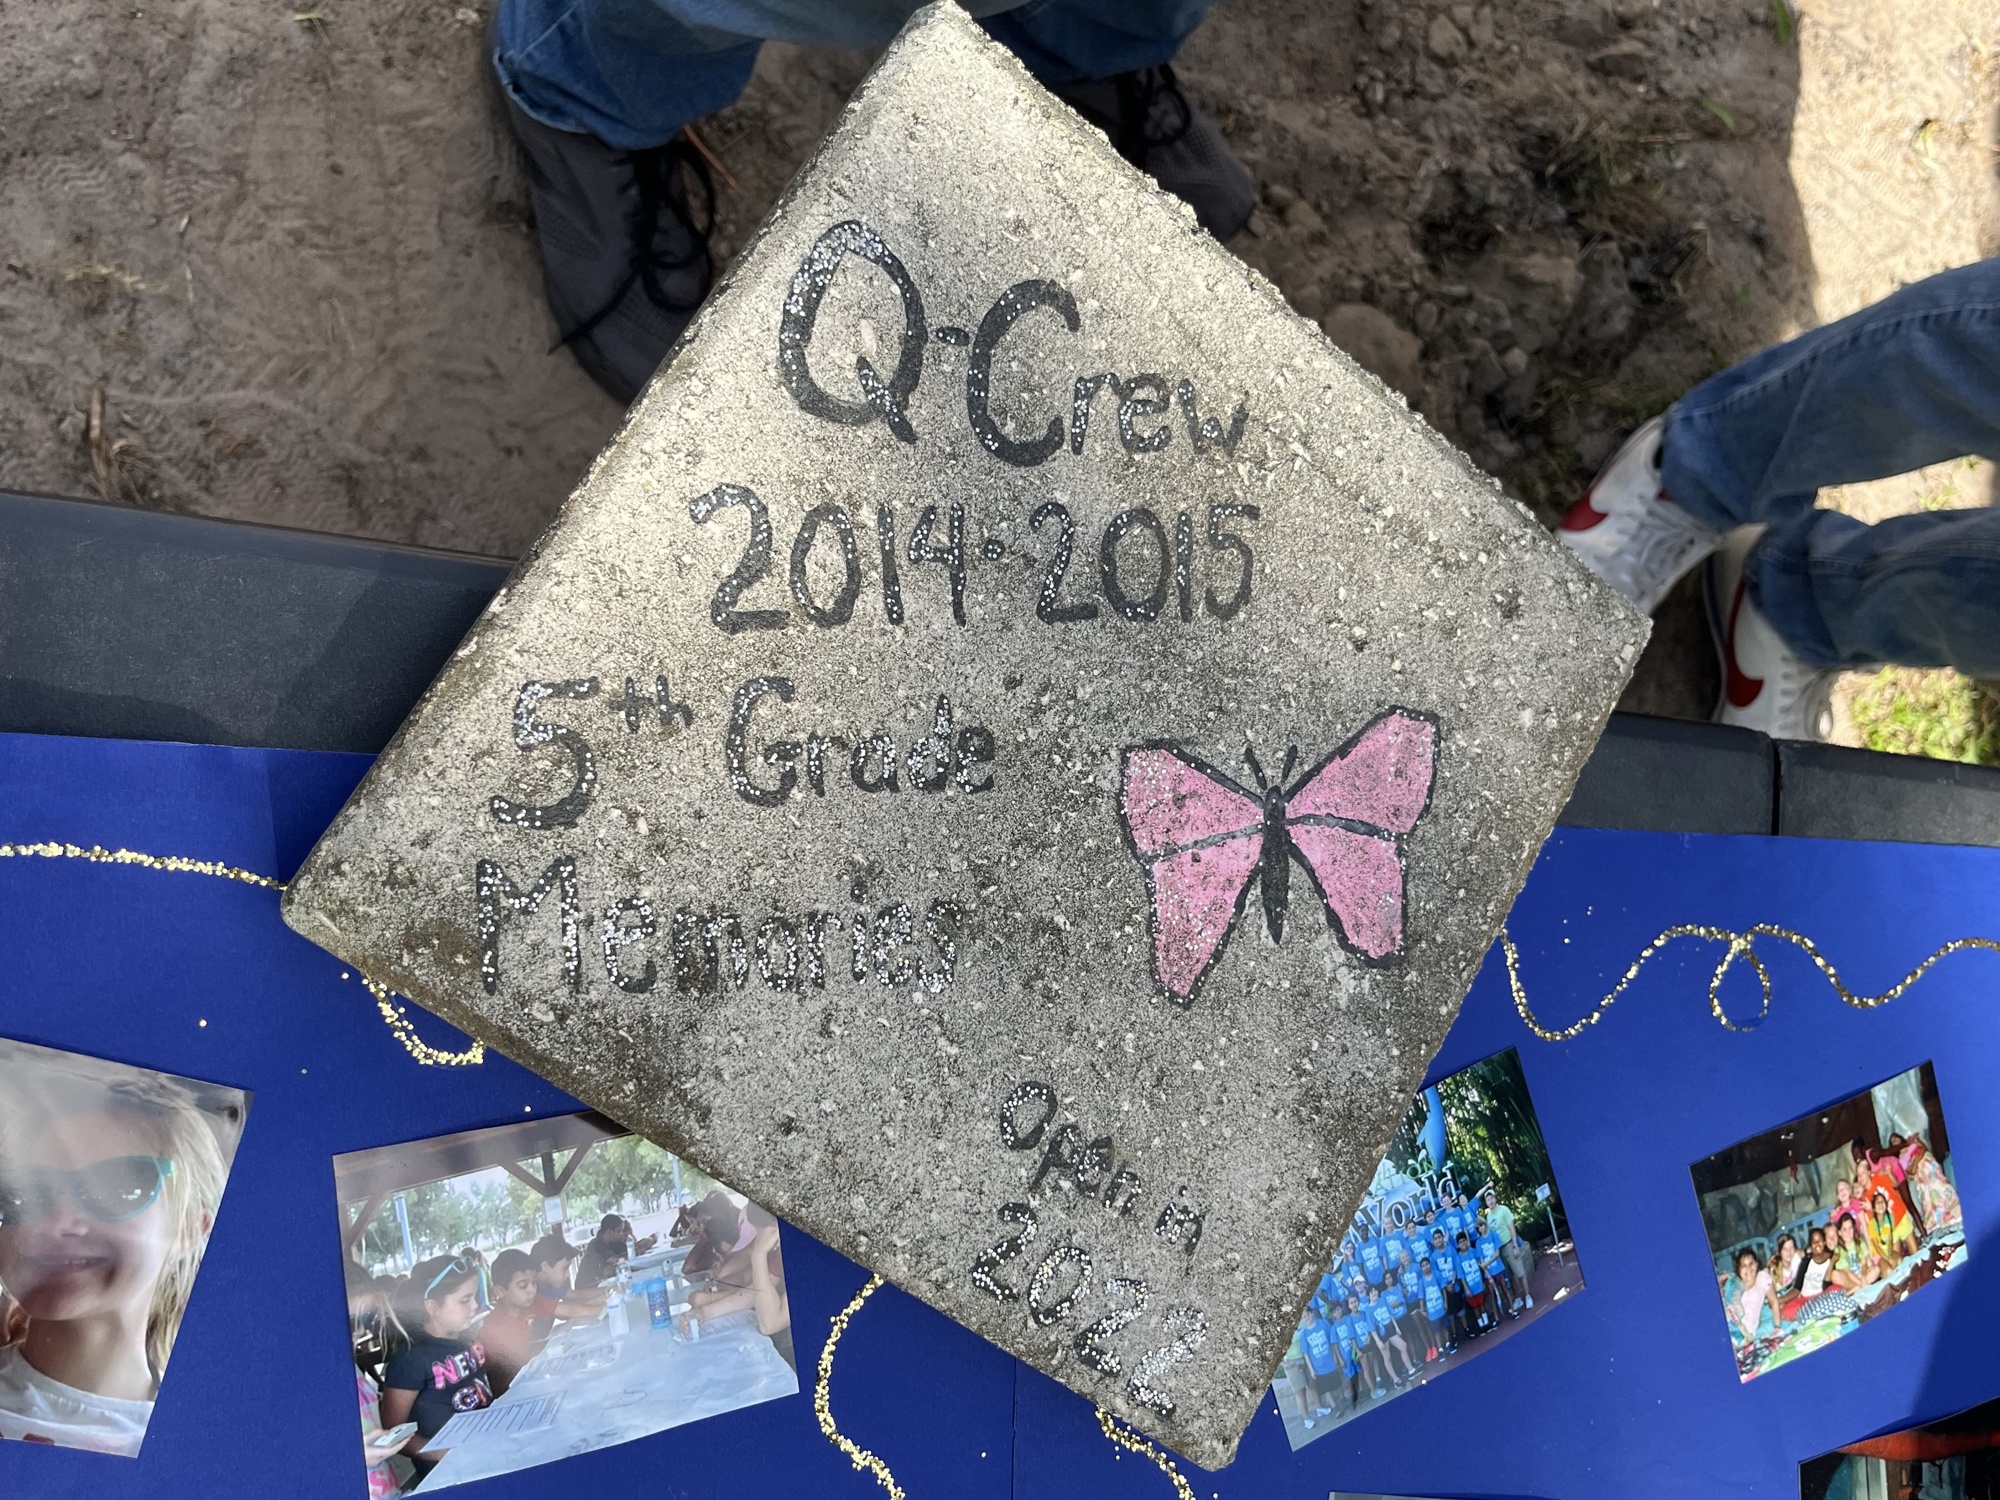 Although Audrey Quale, the teacher of the fifth grade class, couldn't find the time capsule, she has the stone on display for her students to see.